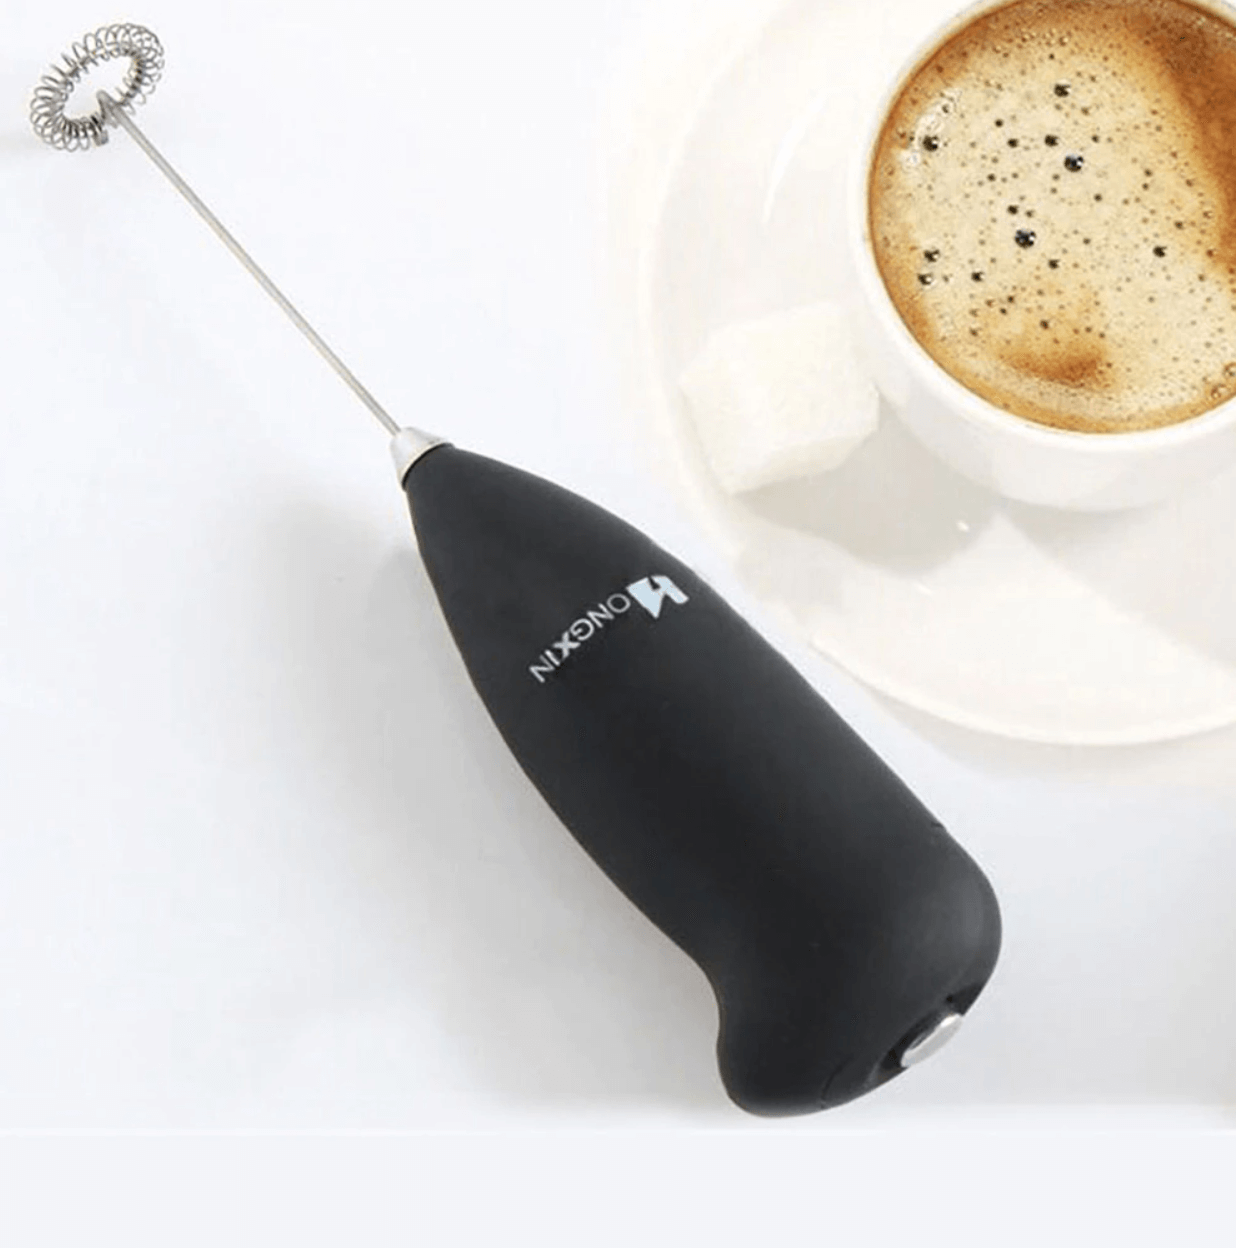 COFFEE & EGG BEATER [SPECIAL EDITION] - CharmKart